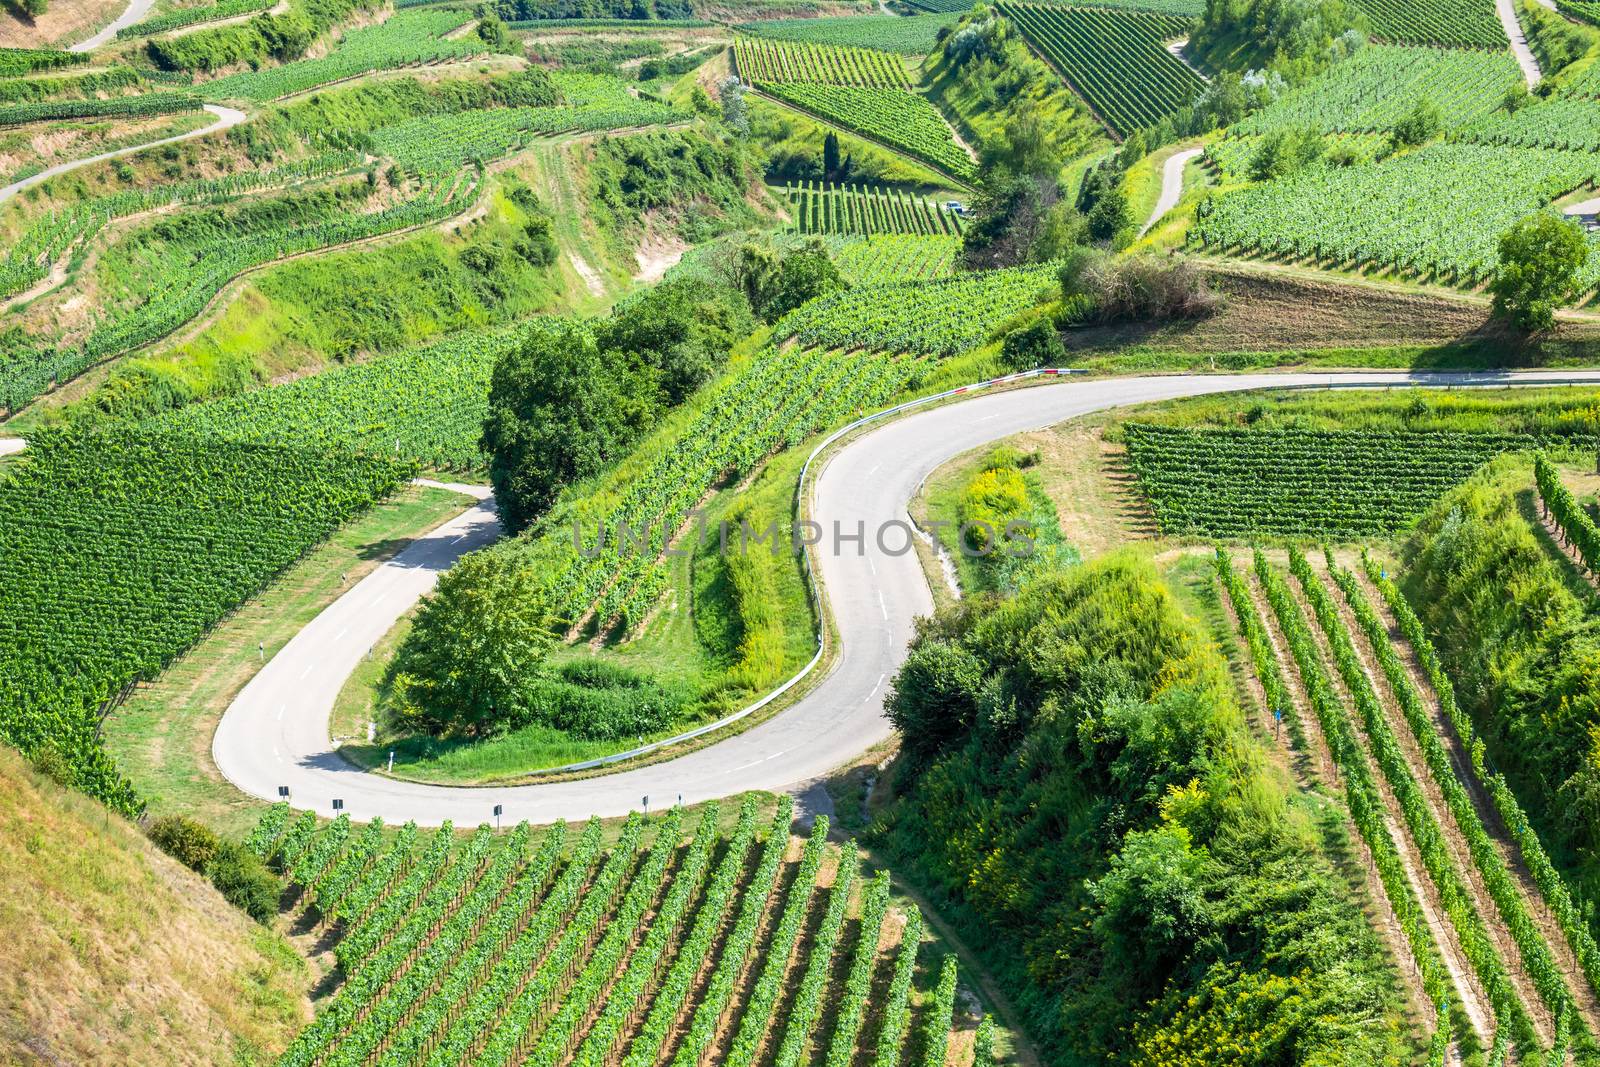 An image of a vineyard scenery at Kaiserstuhl Germany